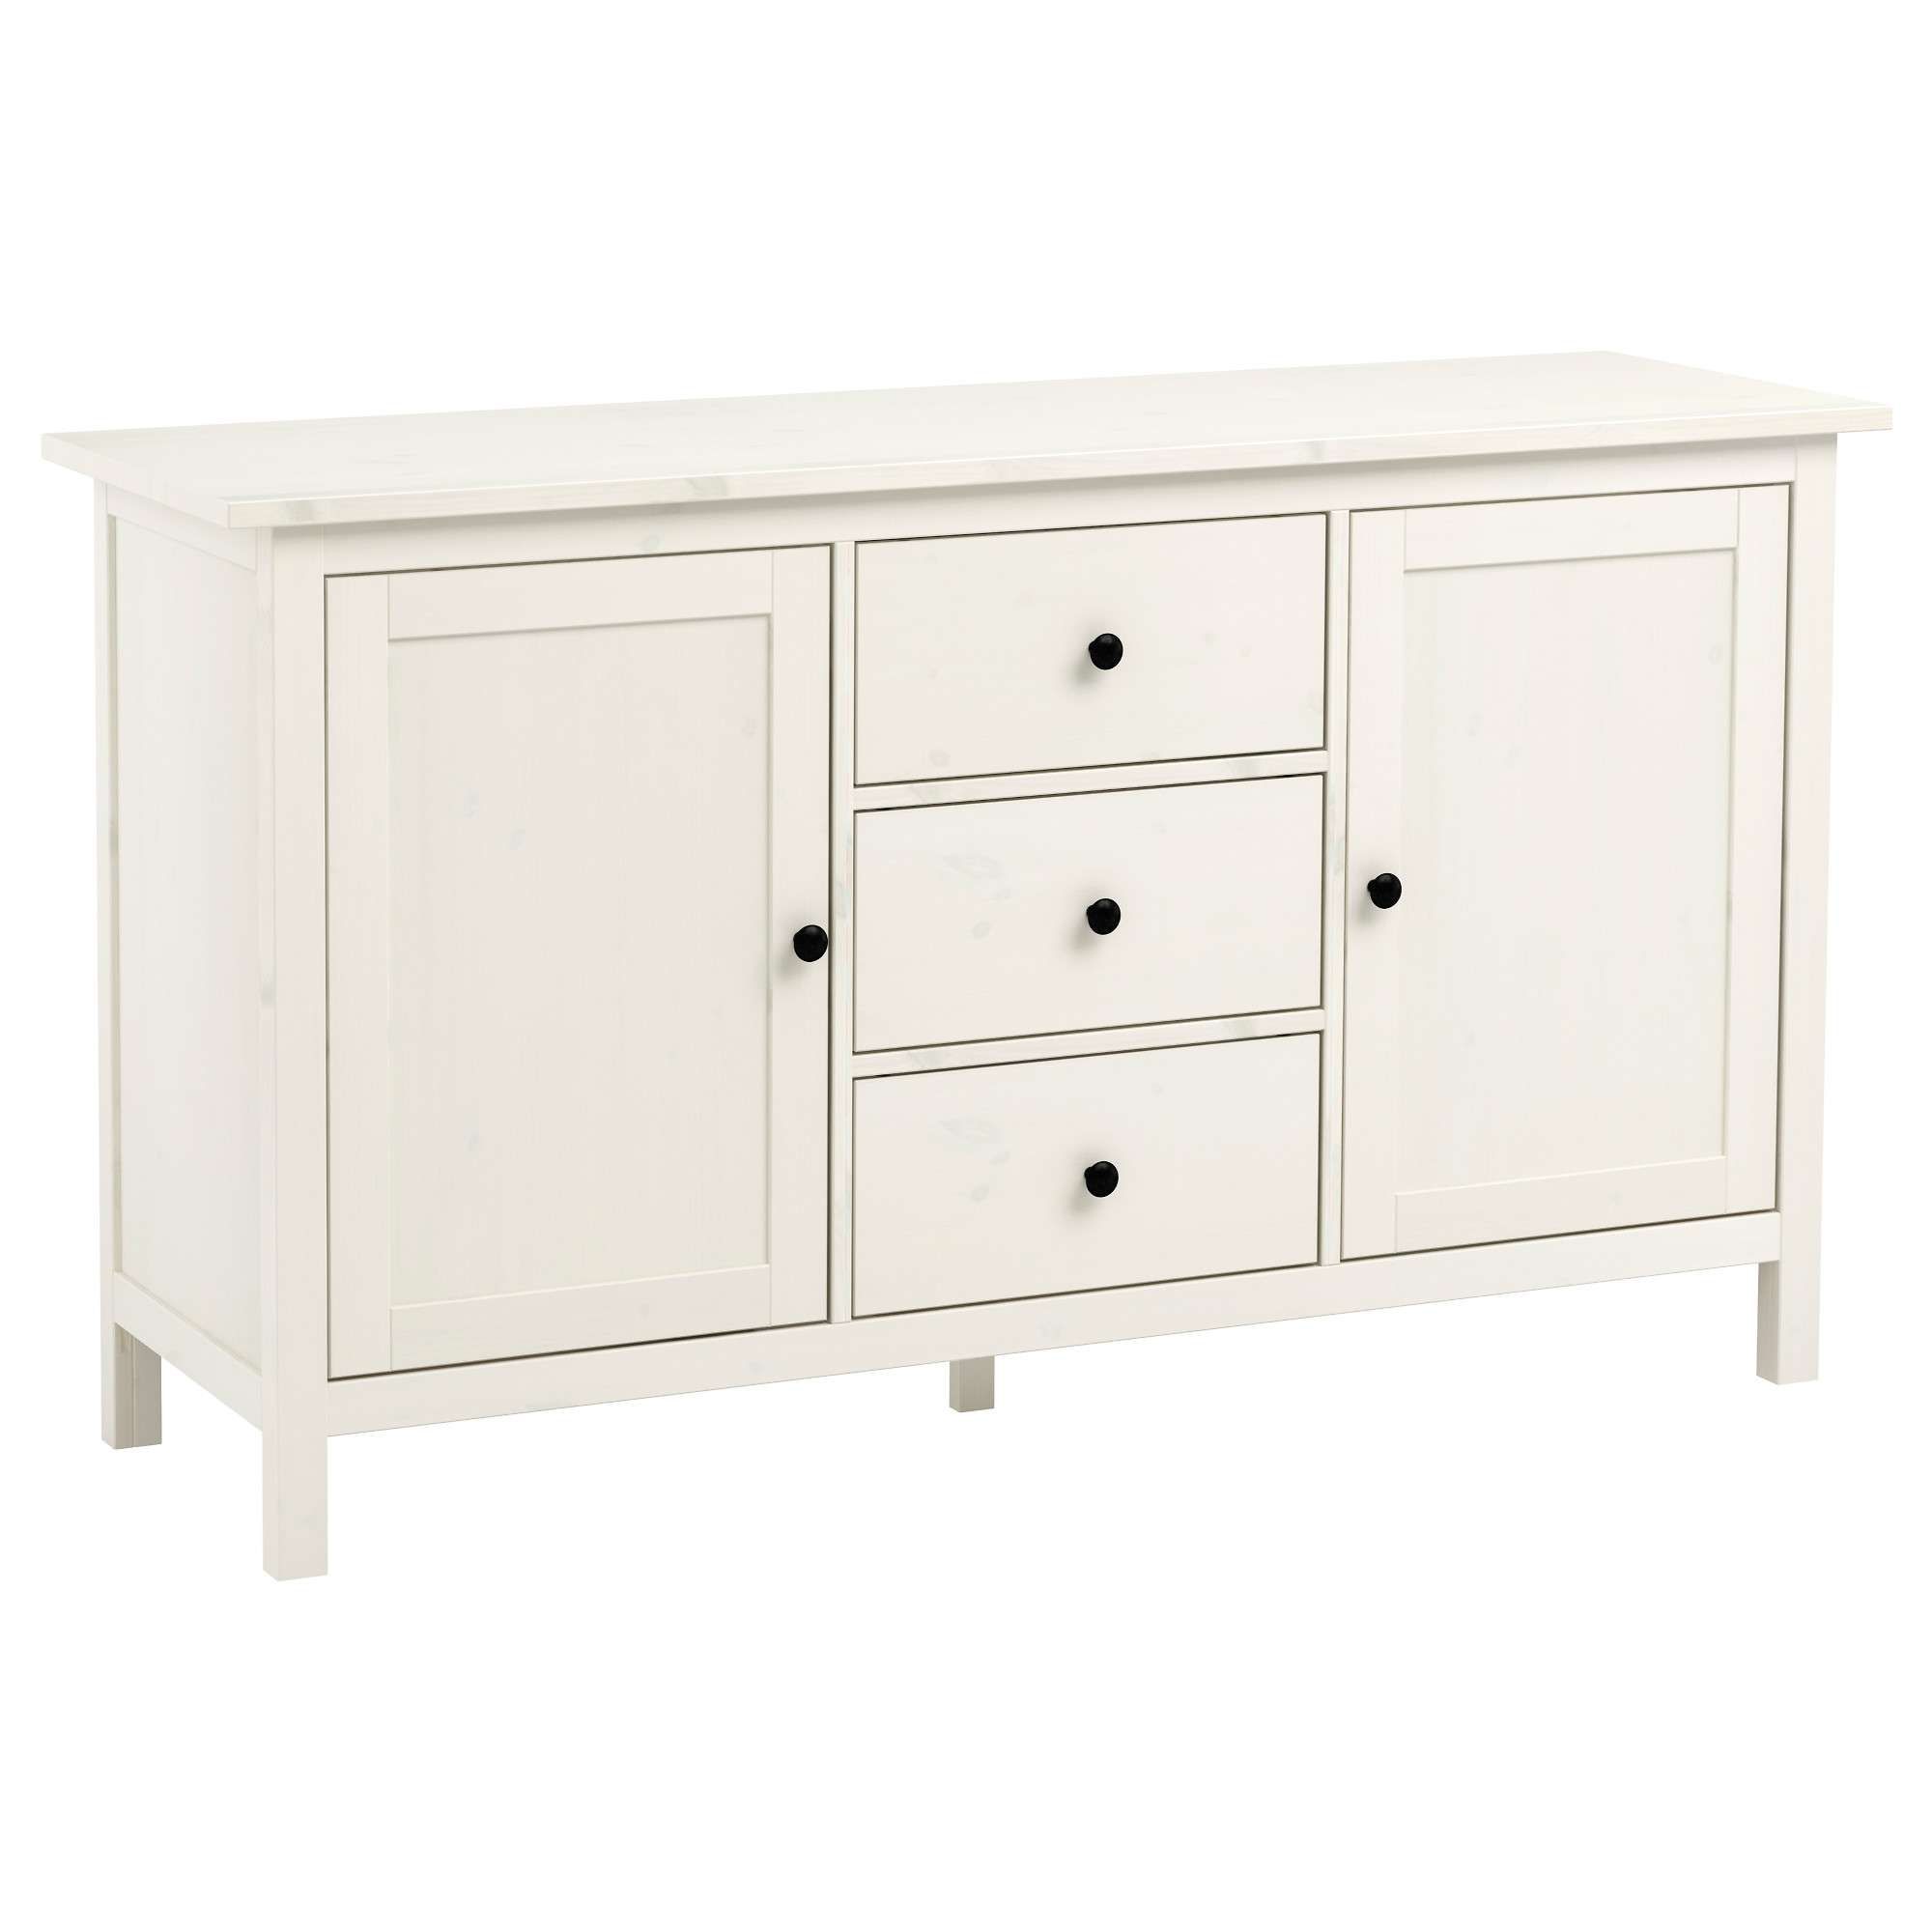 Hemnes Sideboard – White Stain – Ikea With Thin White Sideboards (View 2 of 20)